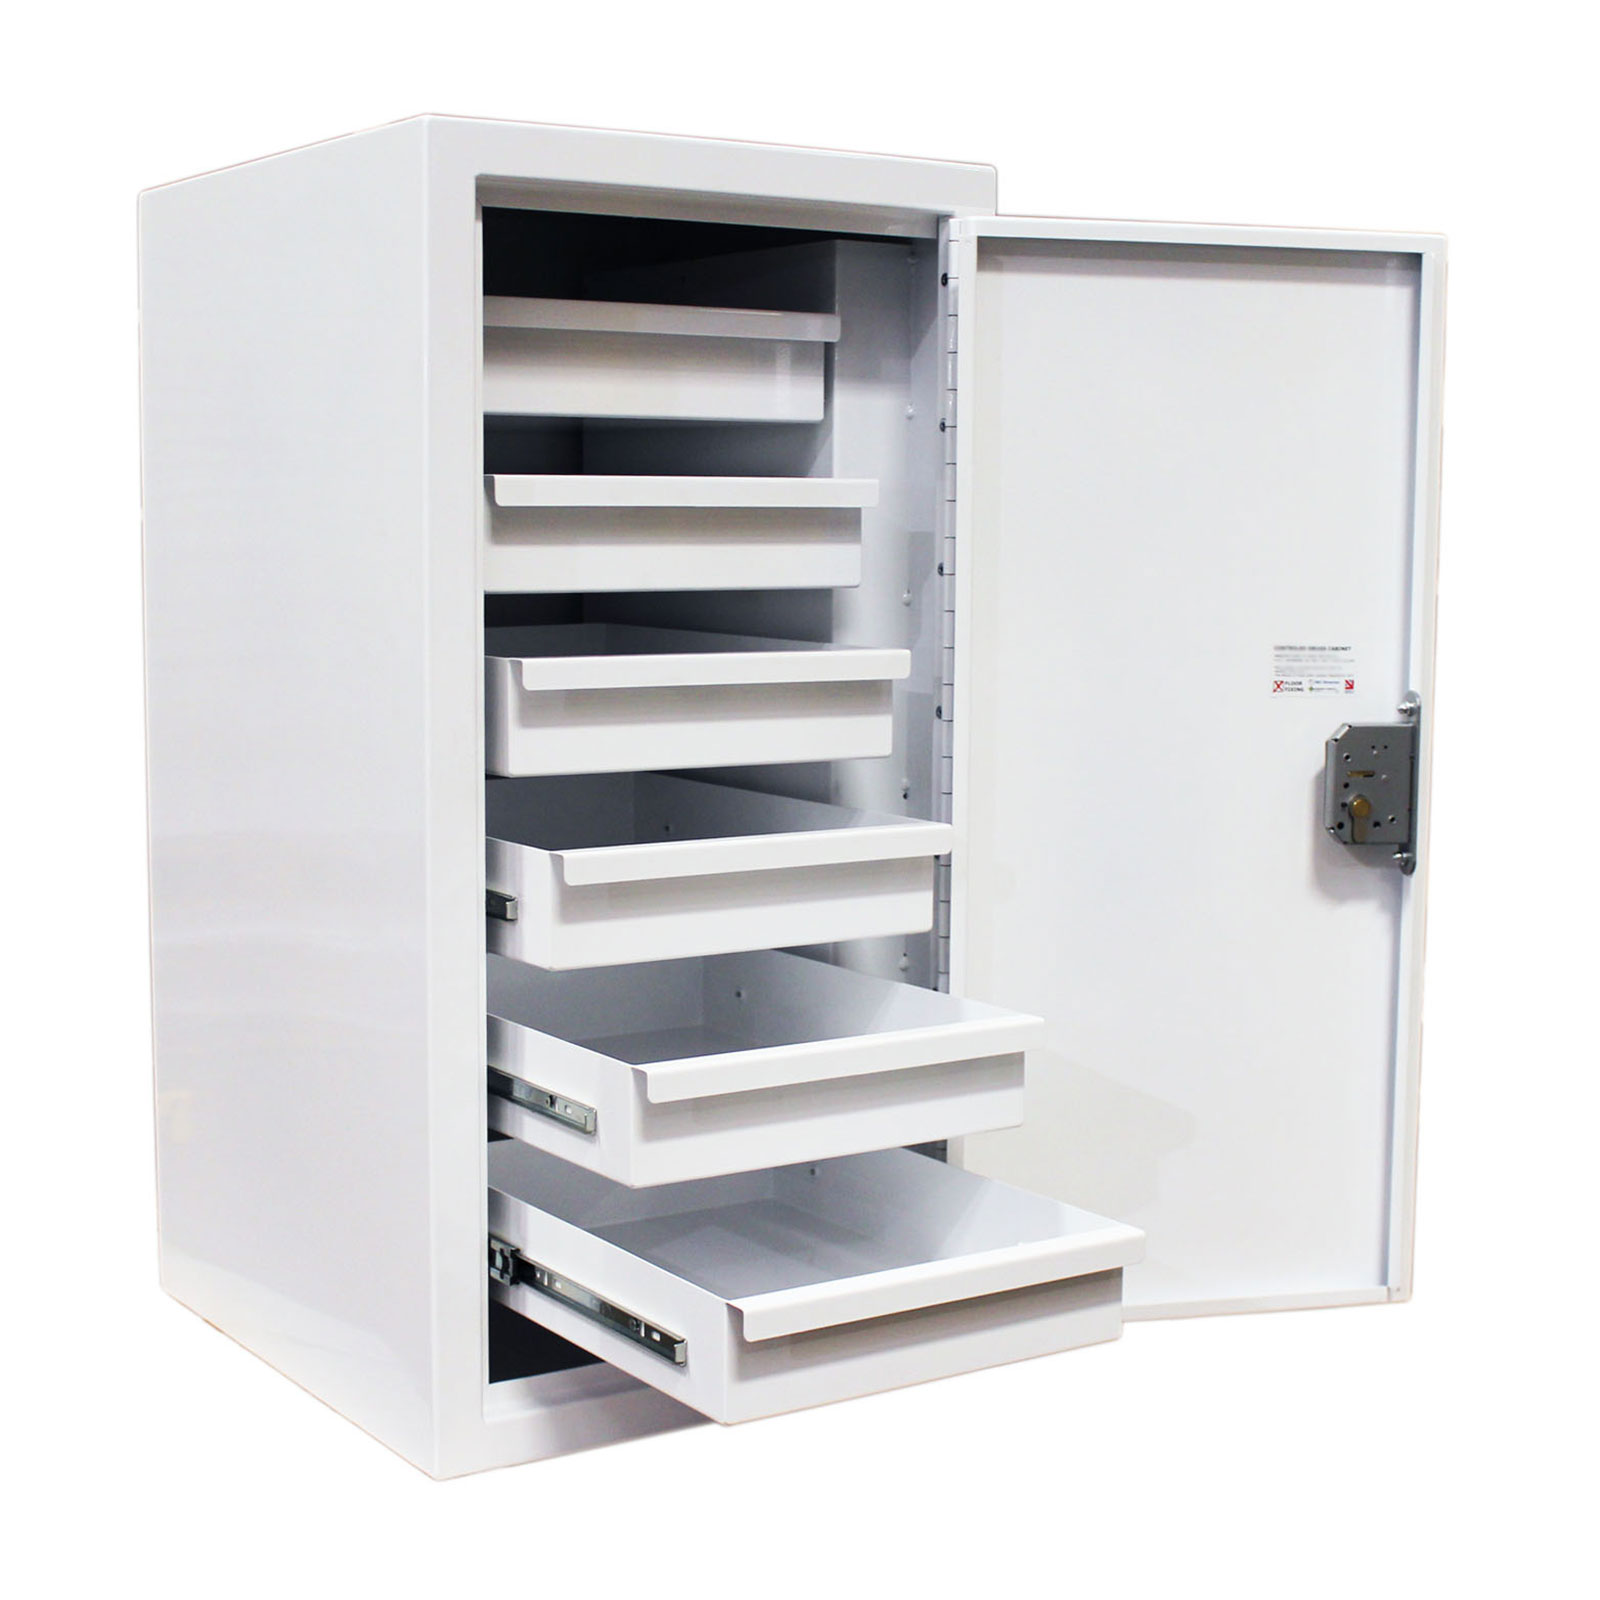 FPD 11290 controlled drug cupboard drawers showing